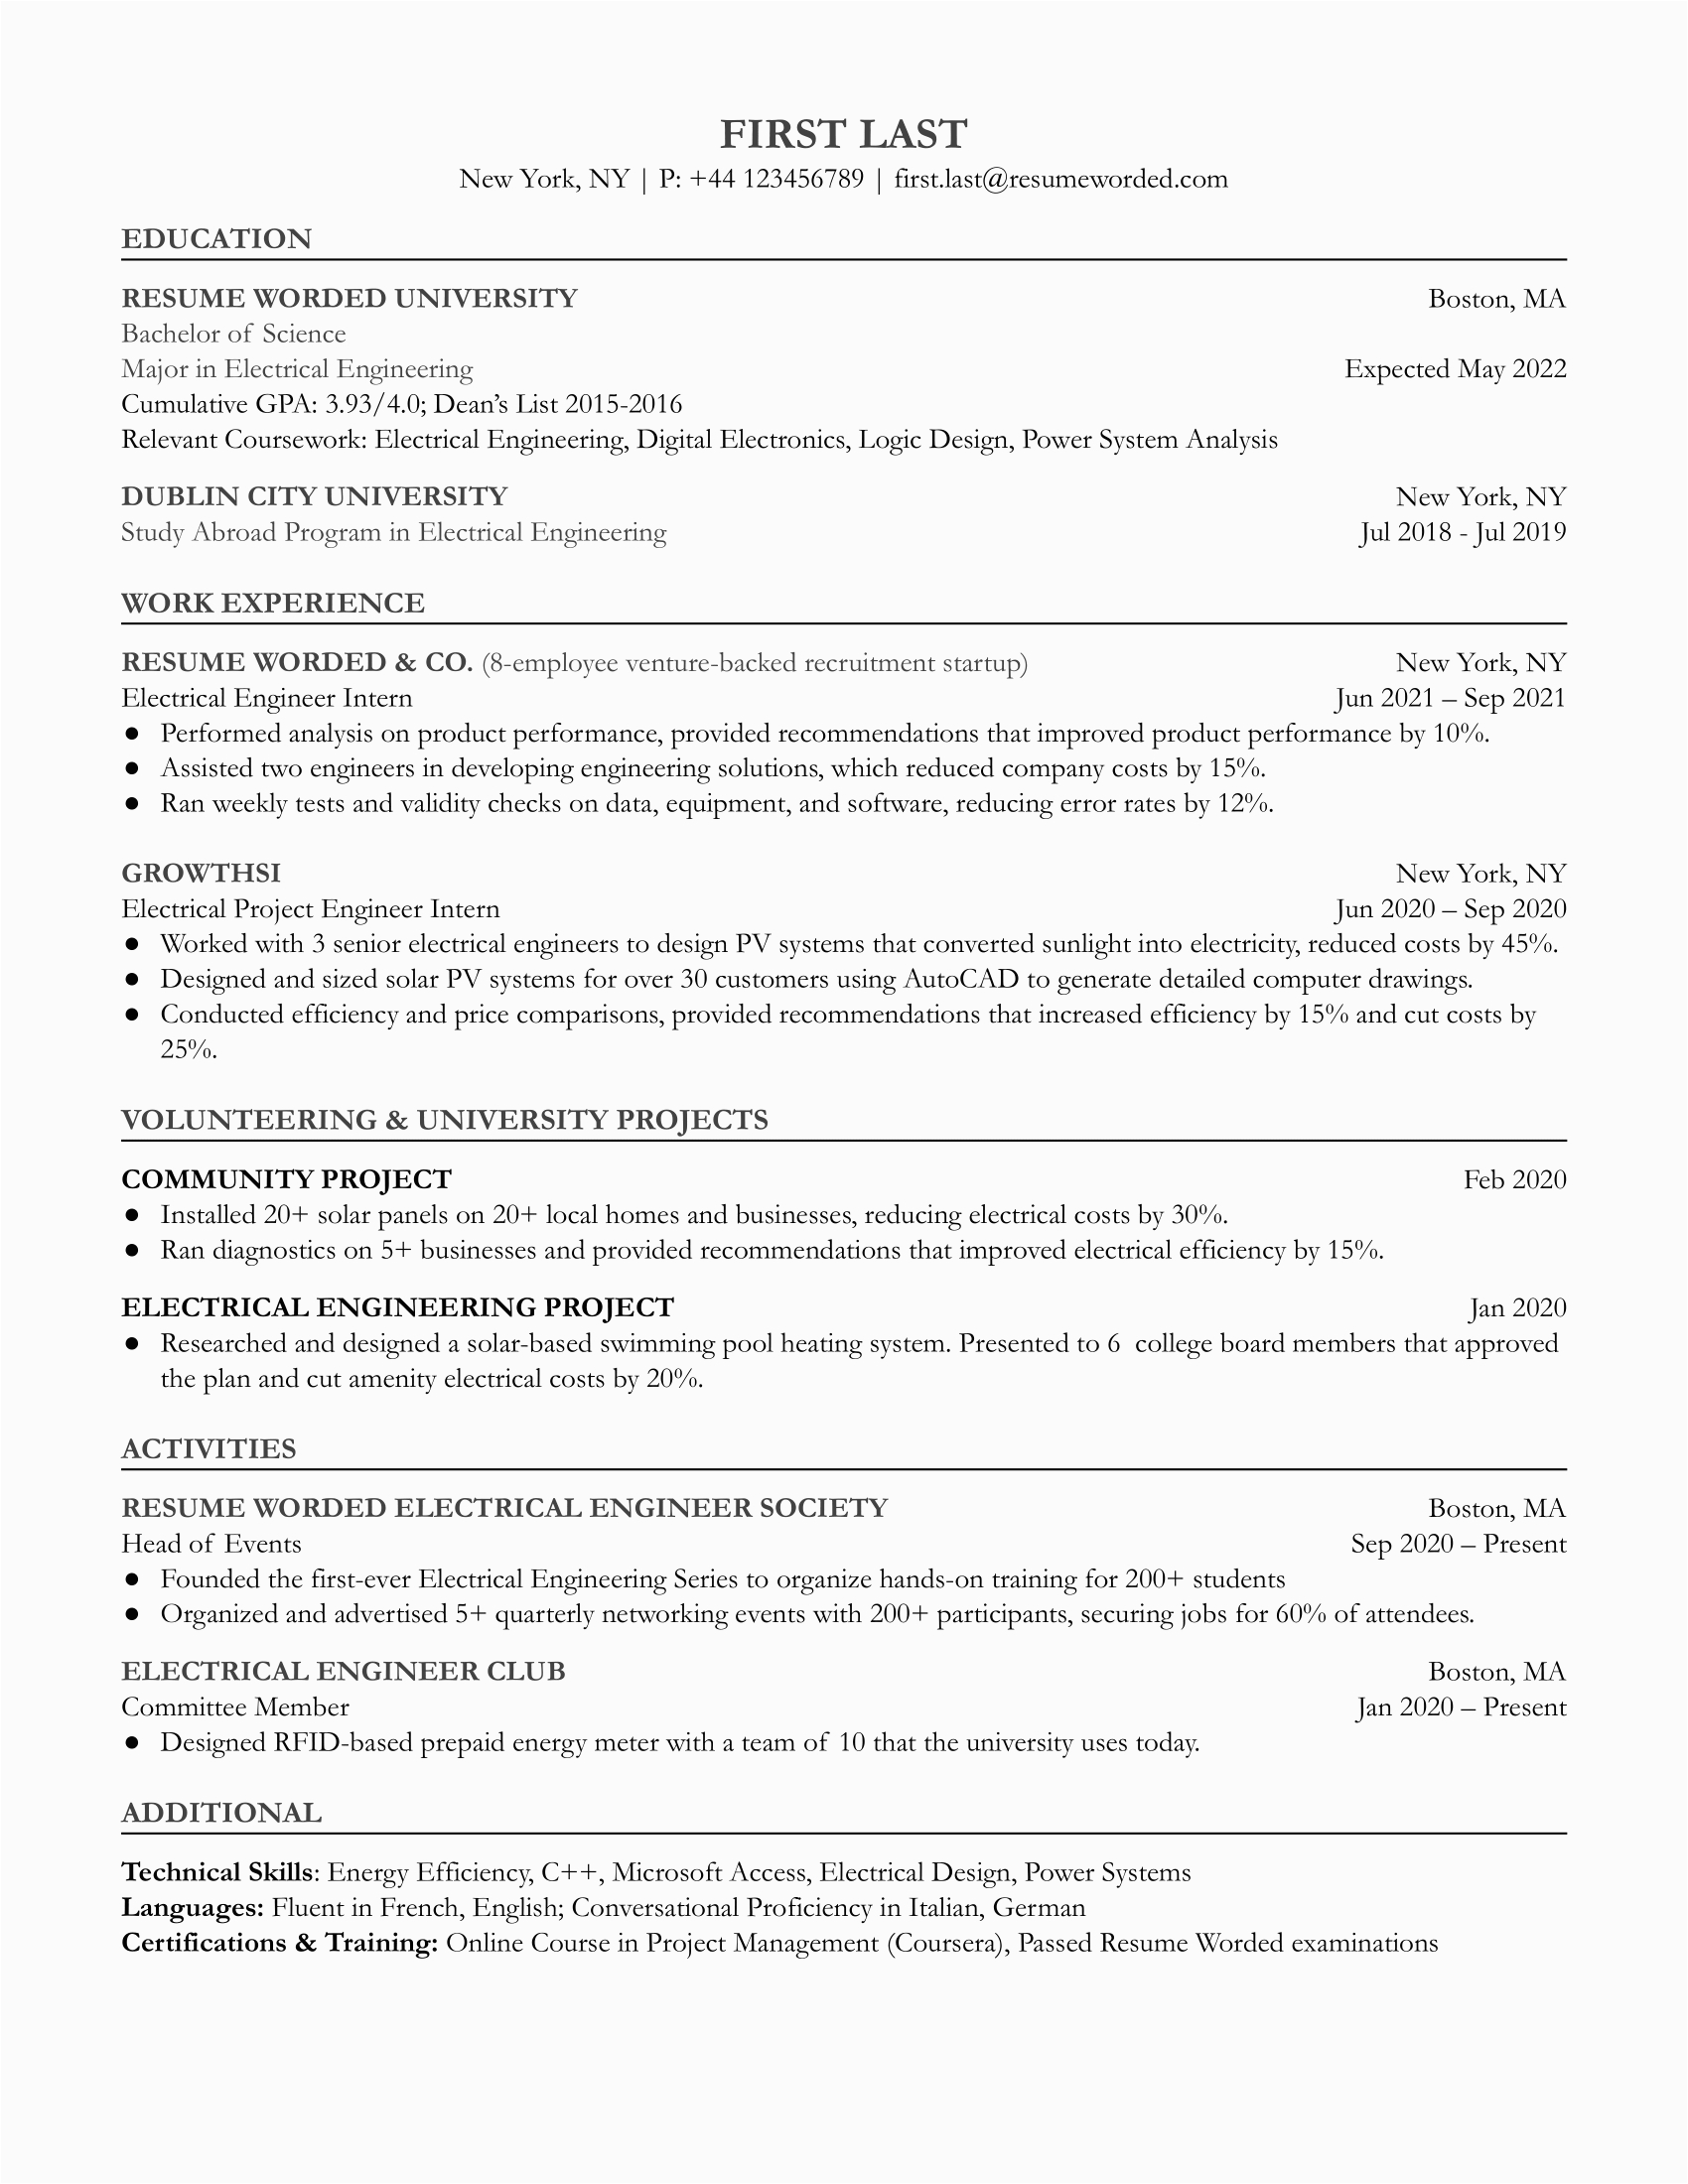 Electrical Engineering Sample Resume Entry Level Entry Level Electrical Engineer Resume Example for 2022